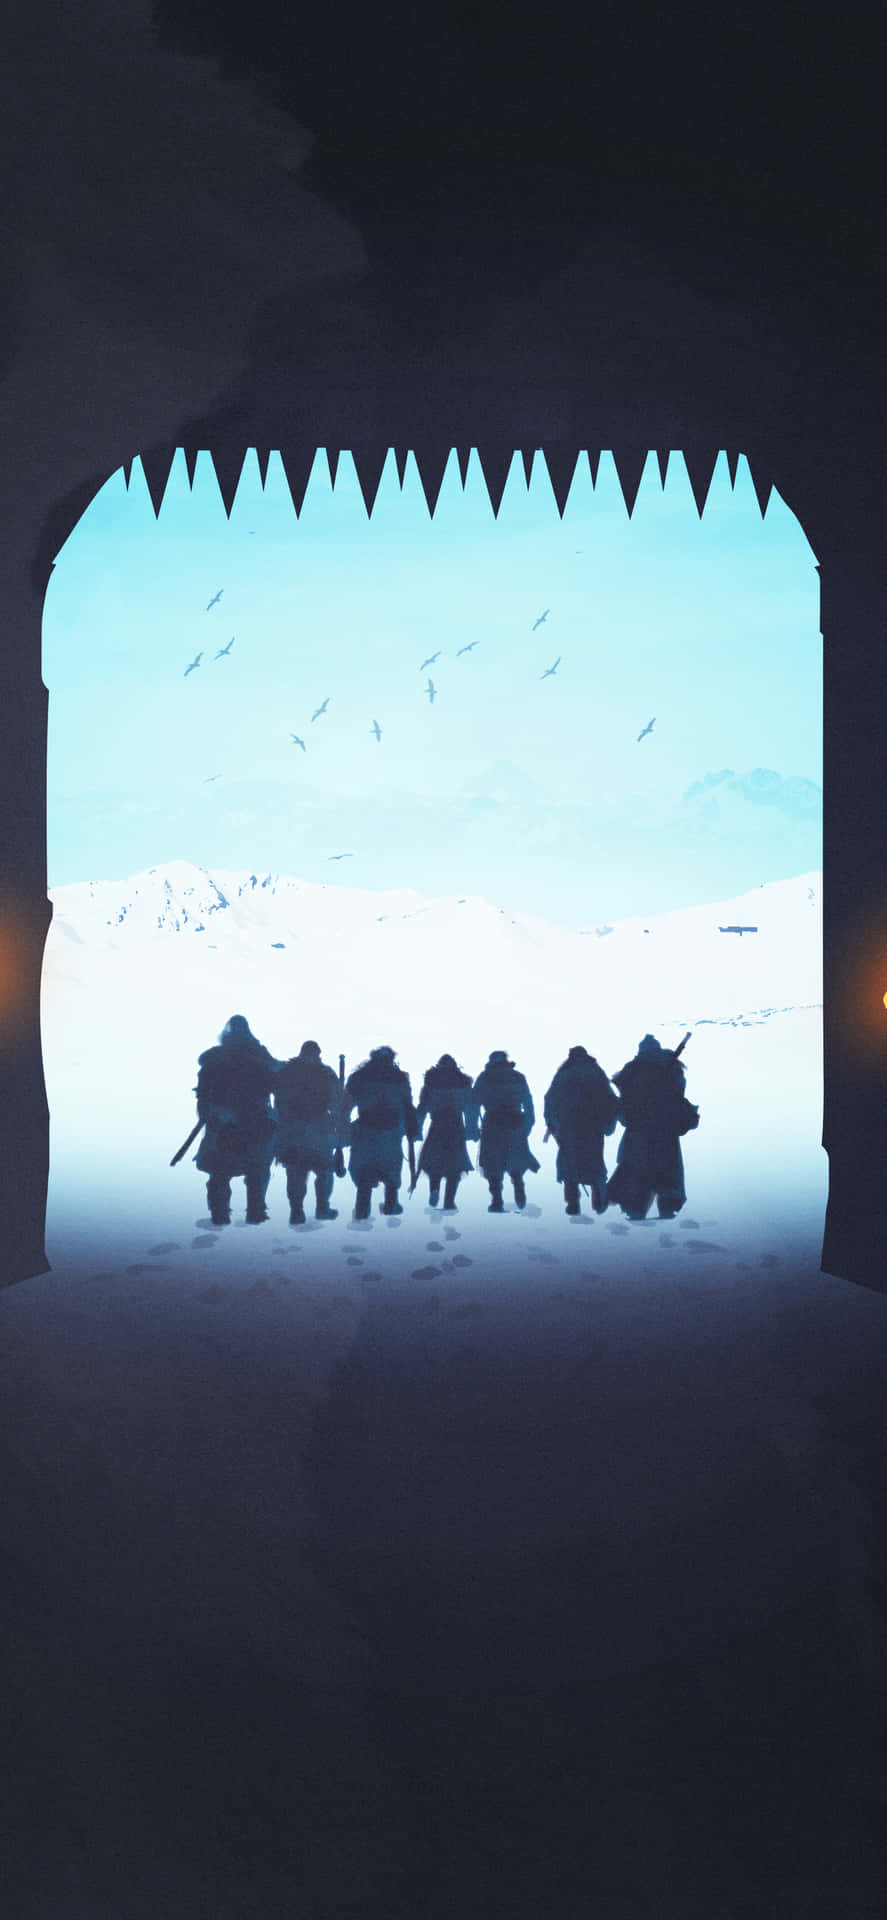 Get Ready to Rule the Seven Kingdoms - The Game Of Thrones Iphone Wallpaper